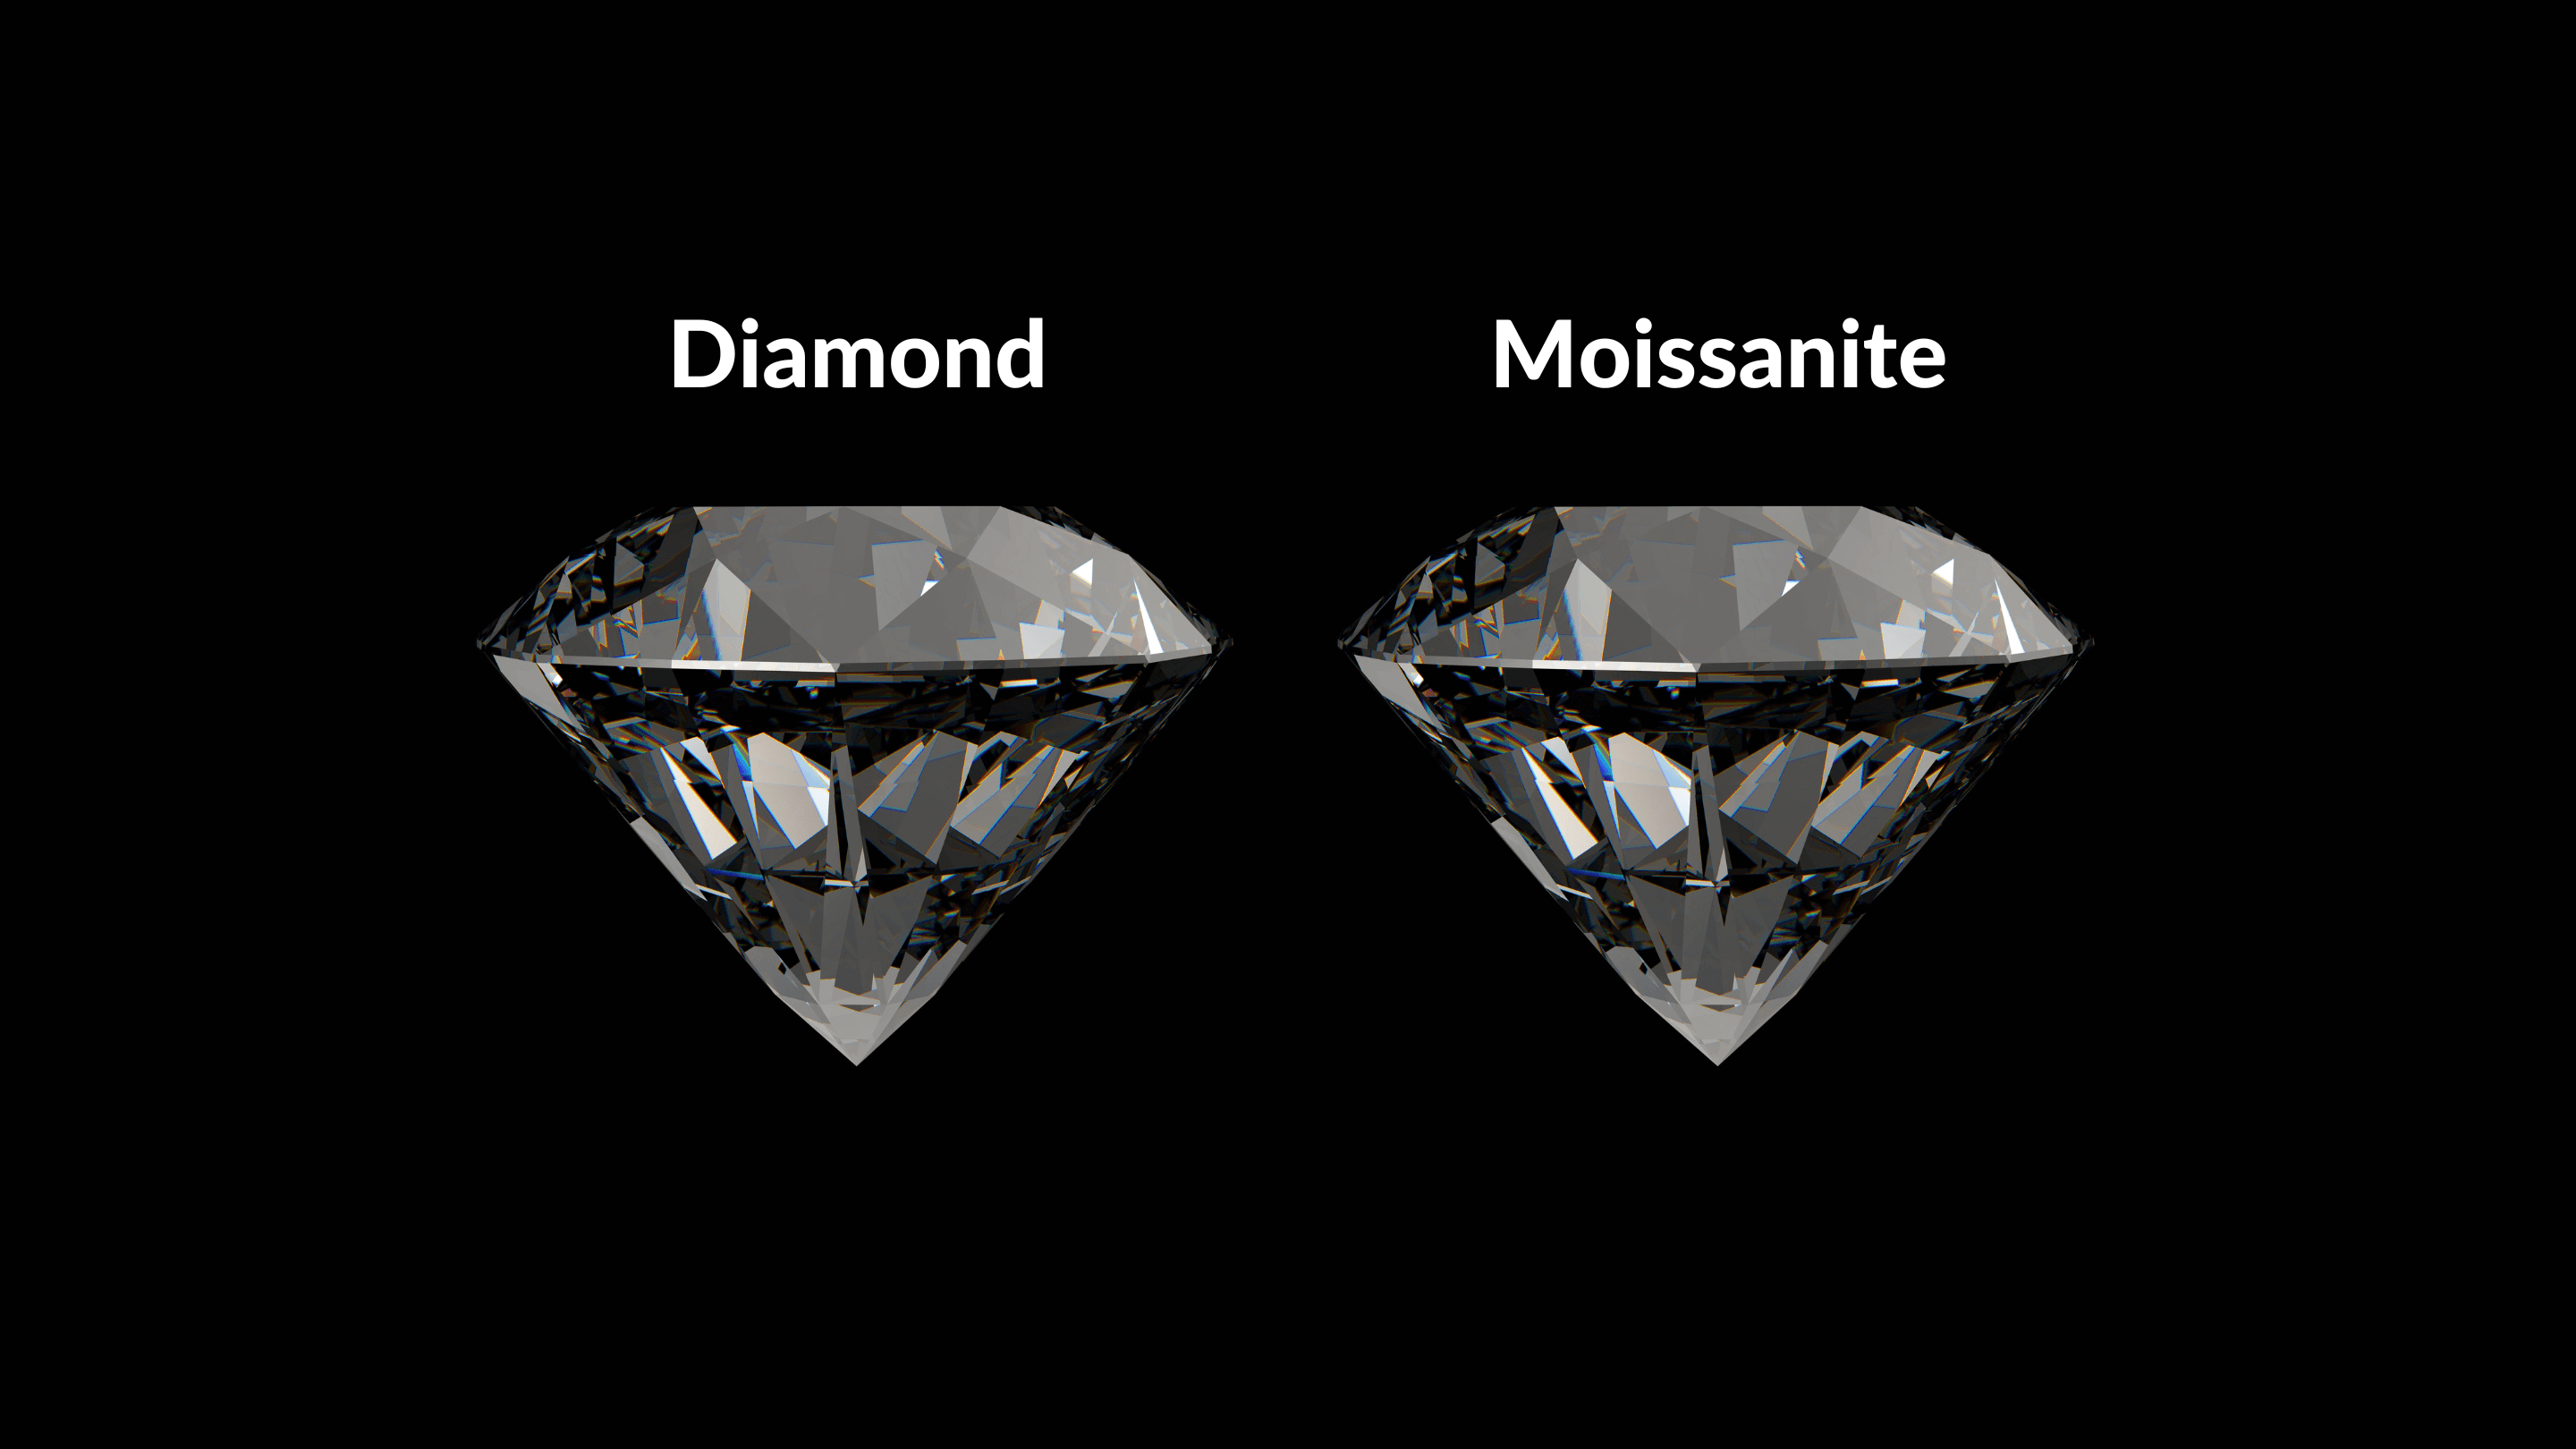 Please explain: How are diamonds grown in a lab?